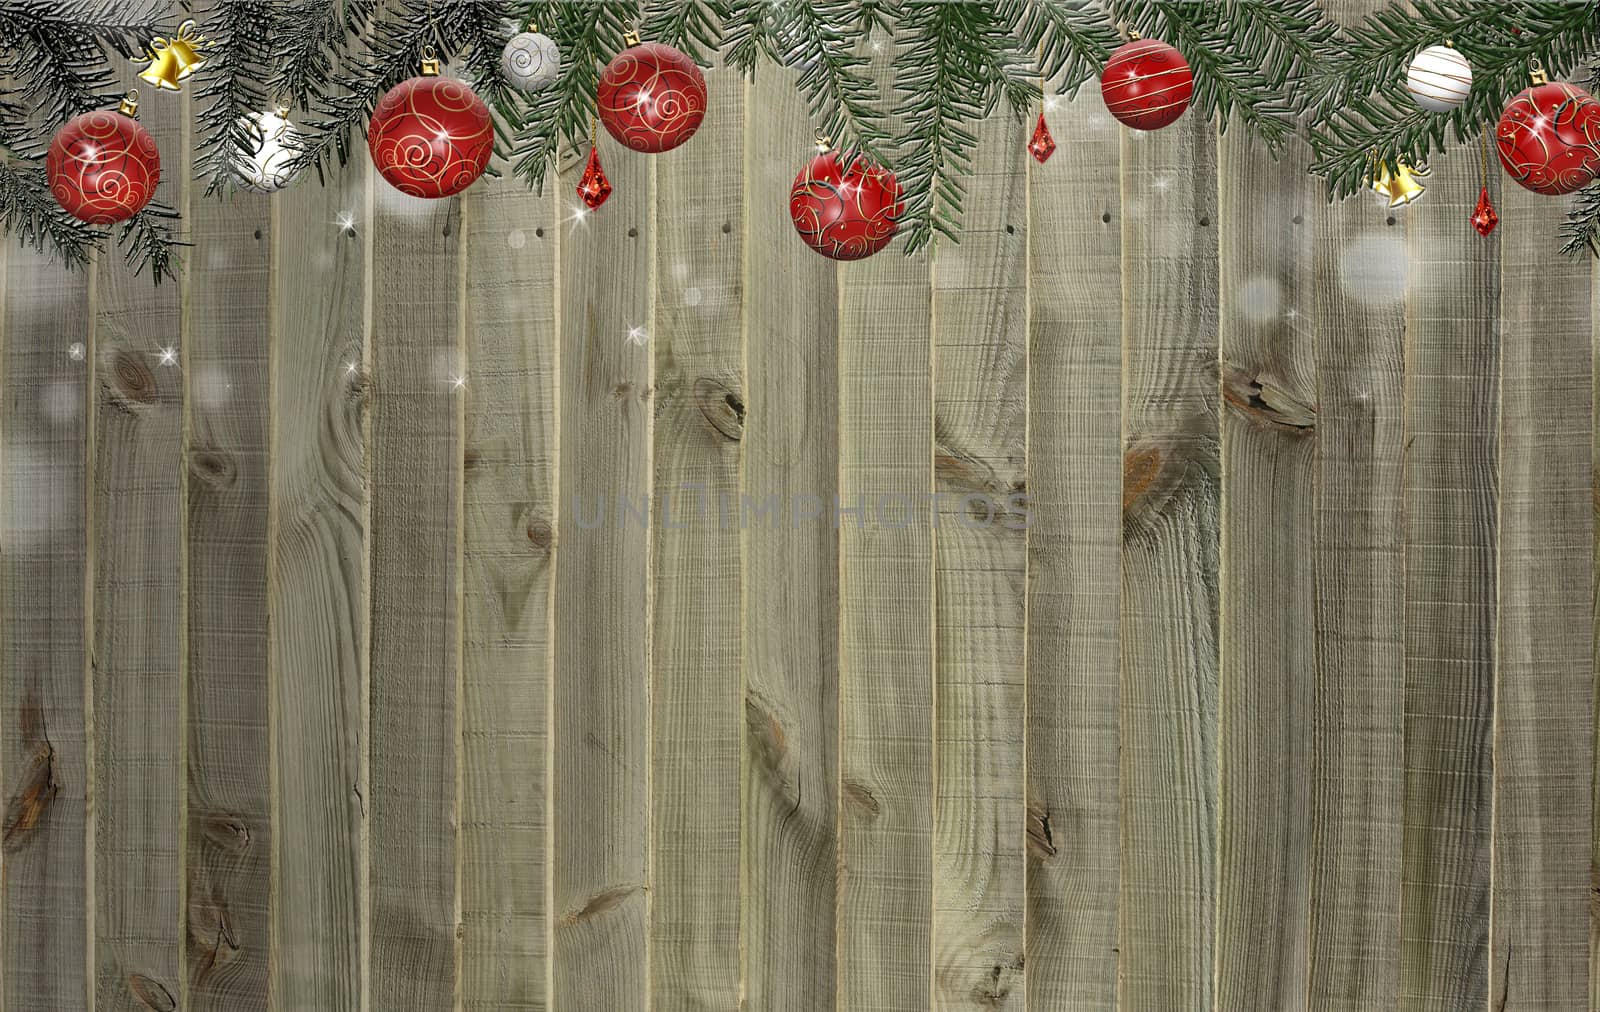 Christmas rustic wooden background with fir branches and red baubles garland. Horizontal christmas grunge border, poster, greeting card, header, website. Place for text 3D illustration.